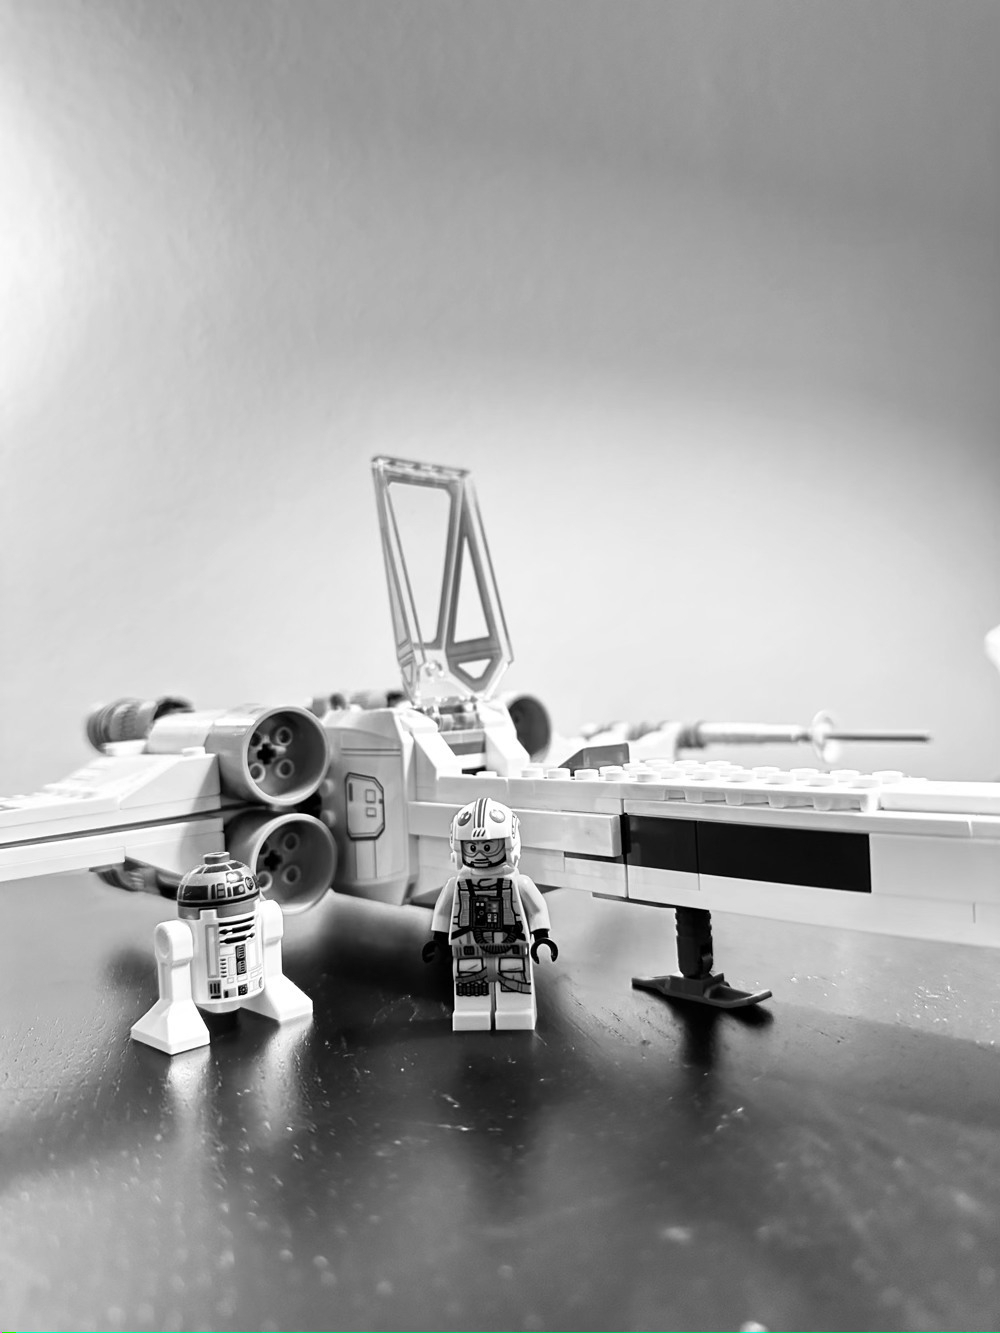 Lego figure of Luke Skywalker and R2-D2 standing in front of a Lego X-Wing fighter.